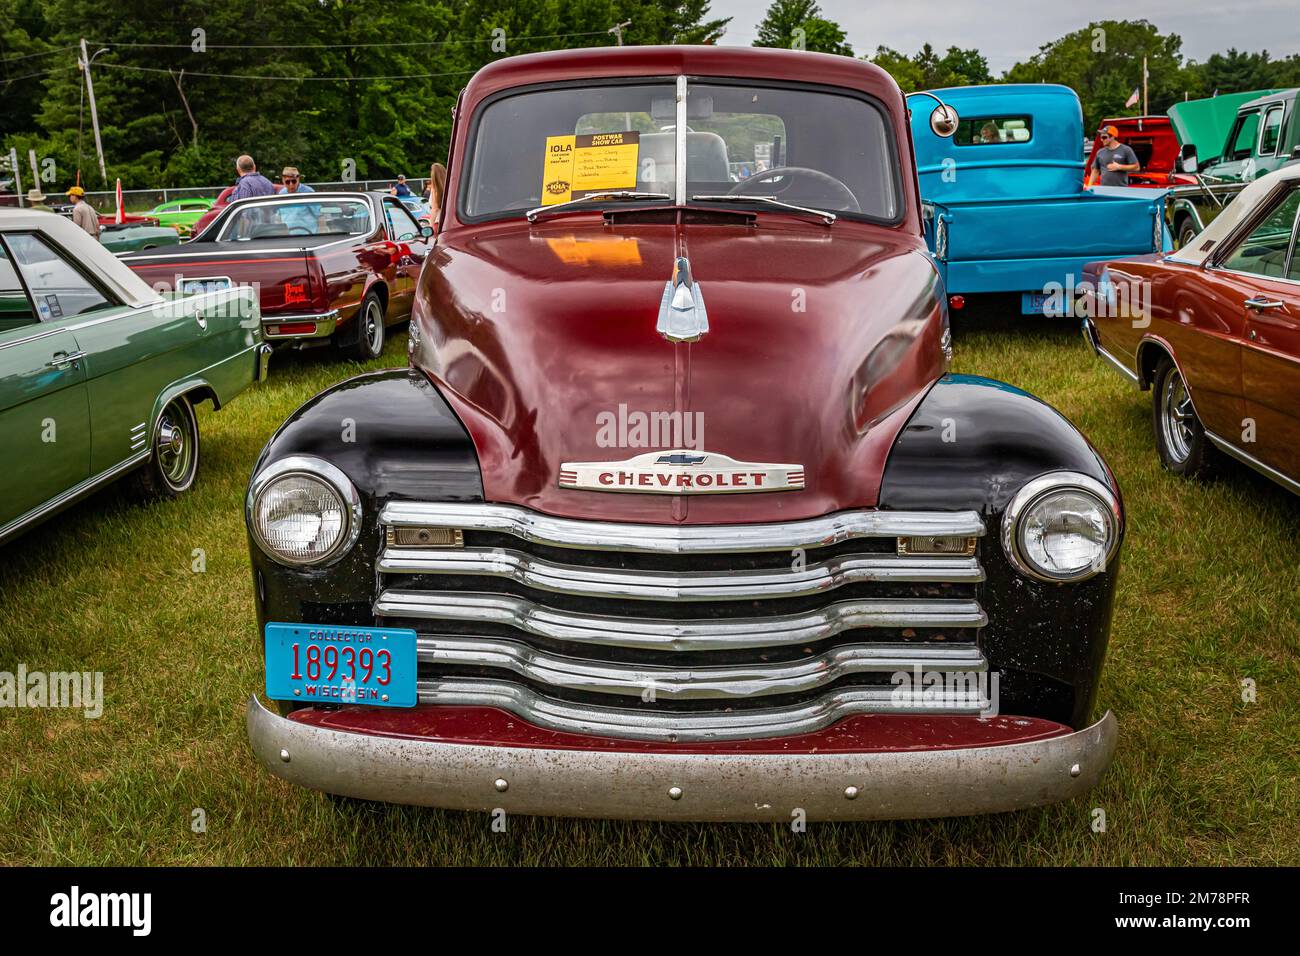 Iola, WI - July 07, 2022: High perspective front view of a 1951 Chevrolet 3100 Pickup Truck at a local car show. Stock Photo